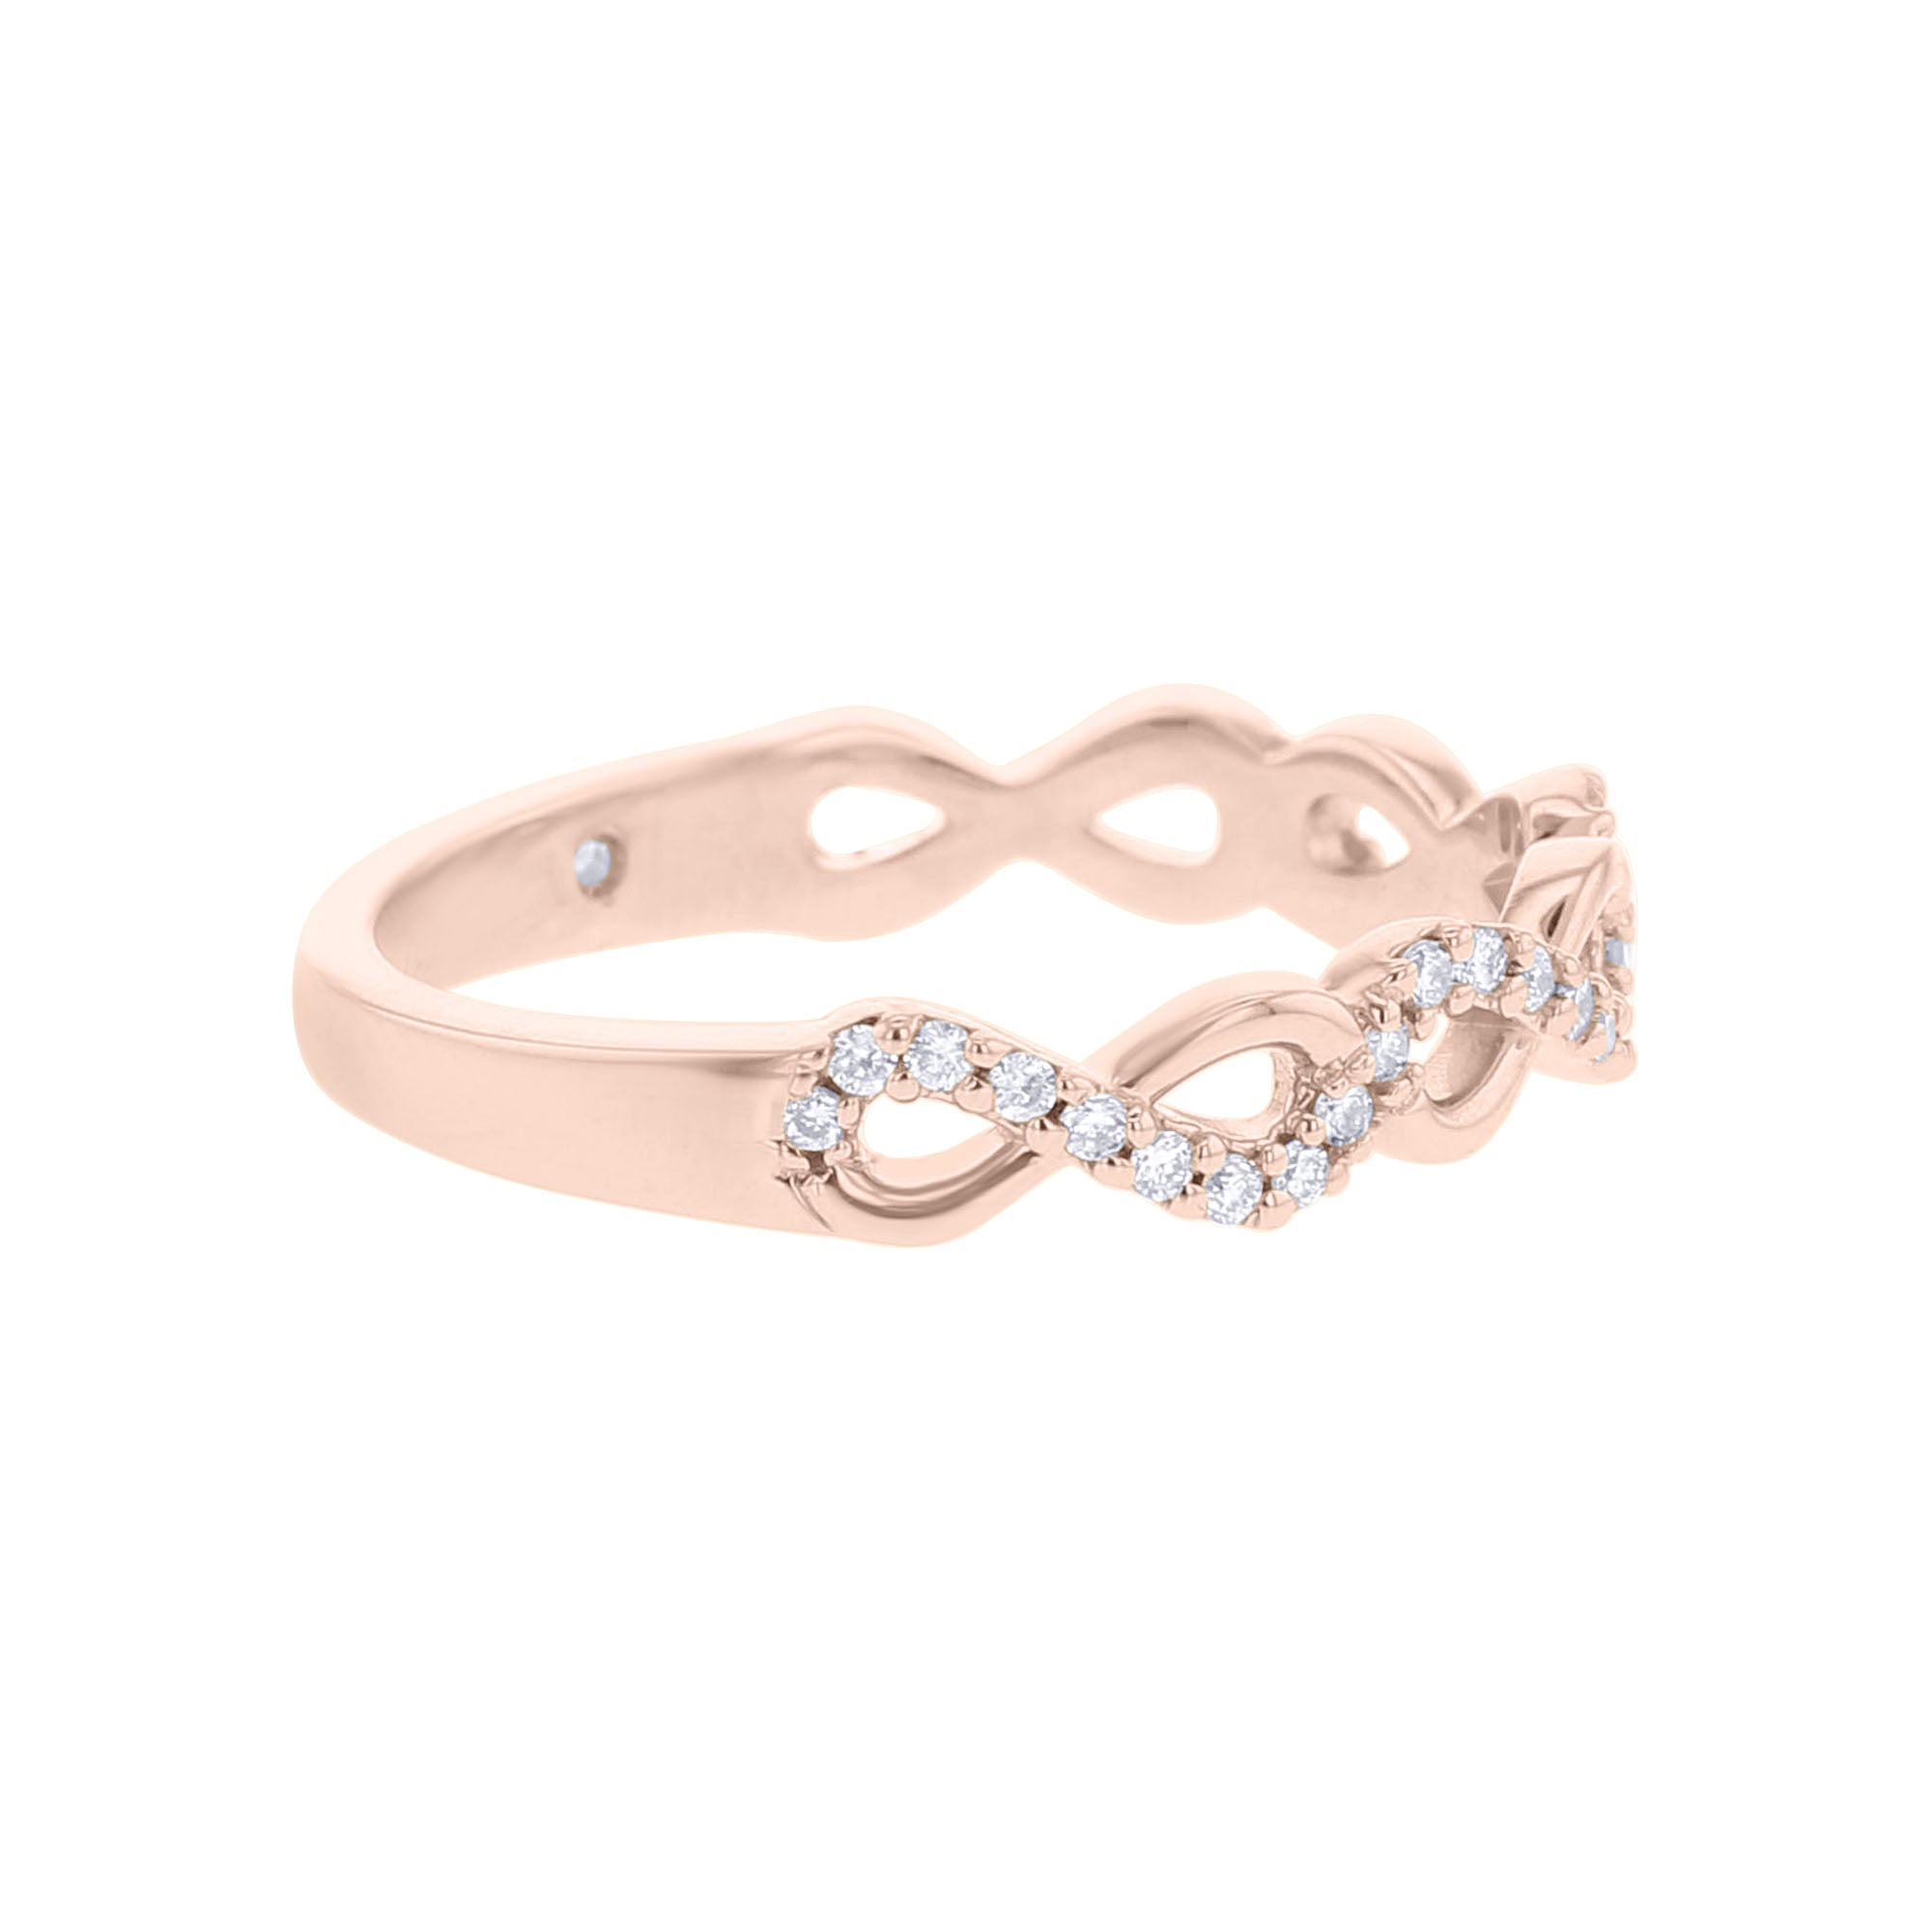 For Infinity Pave Diamond Ring